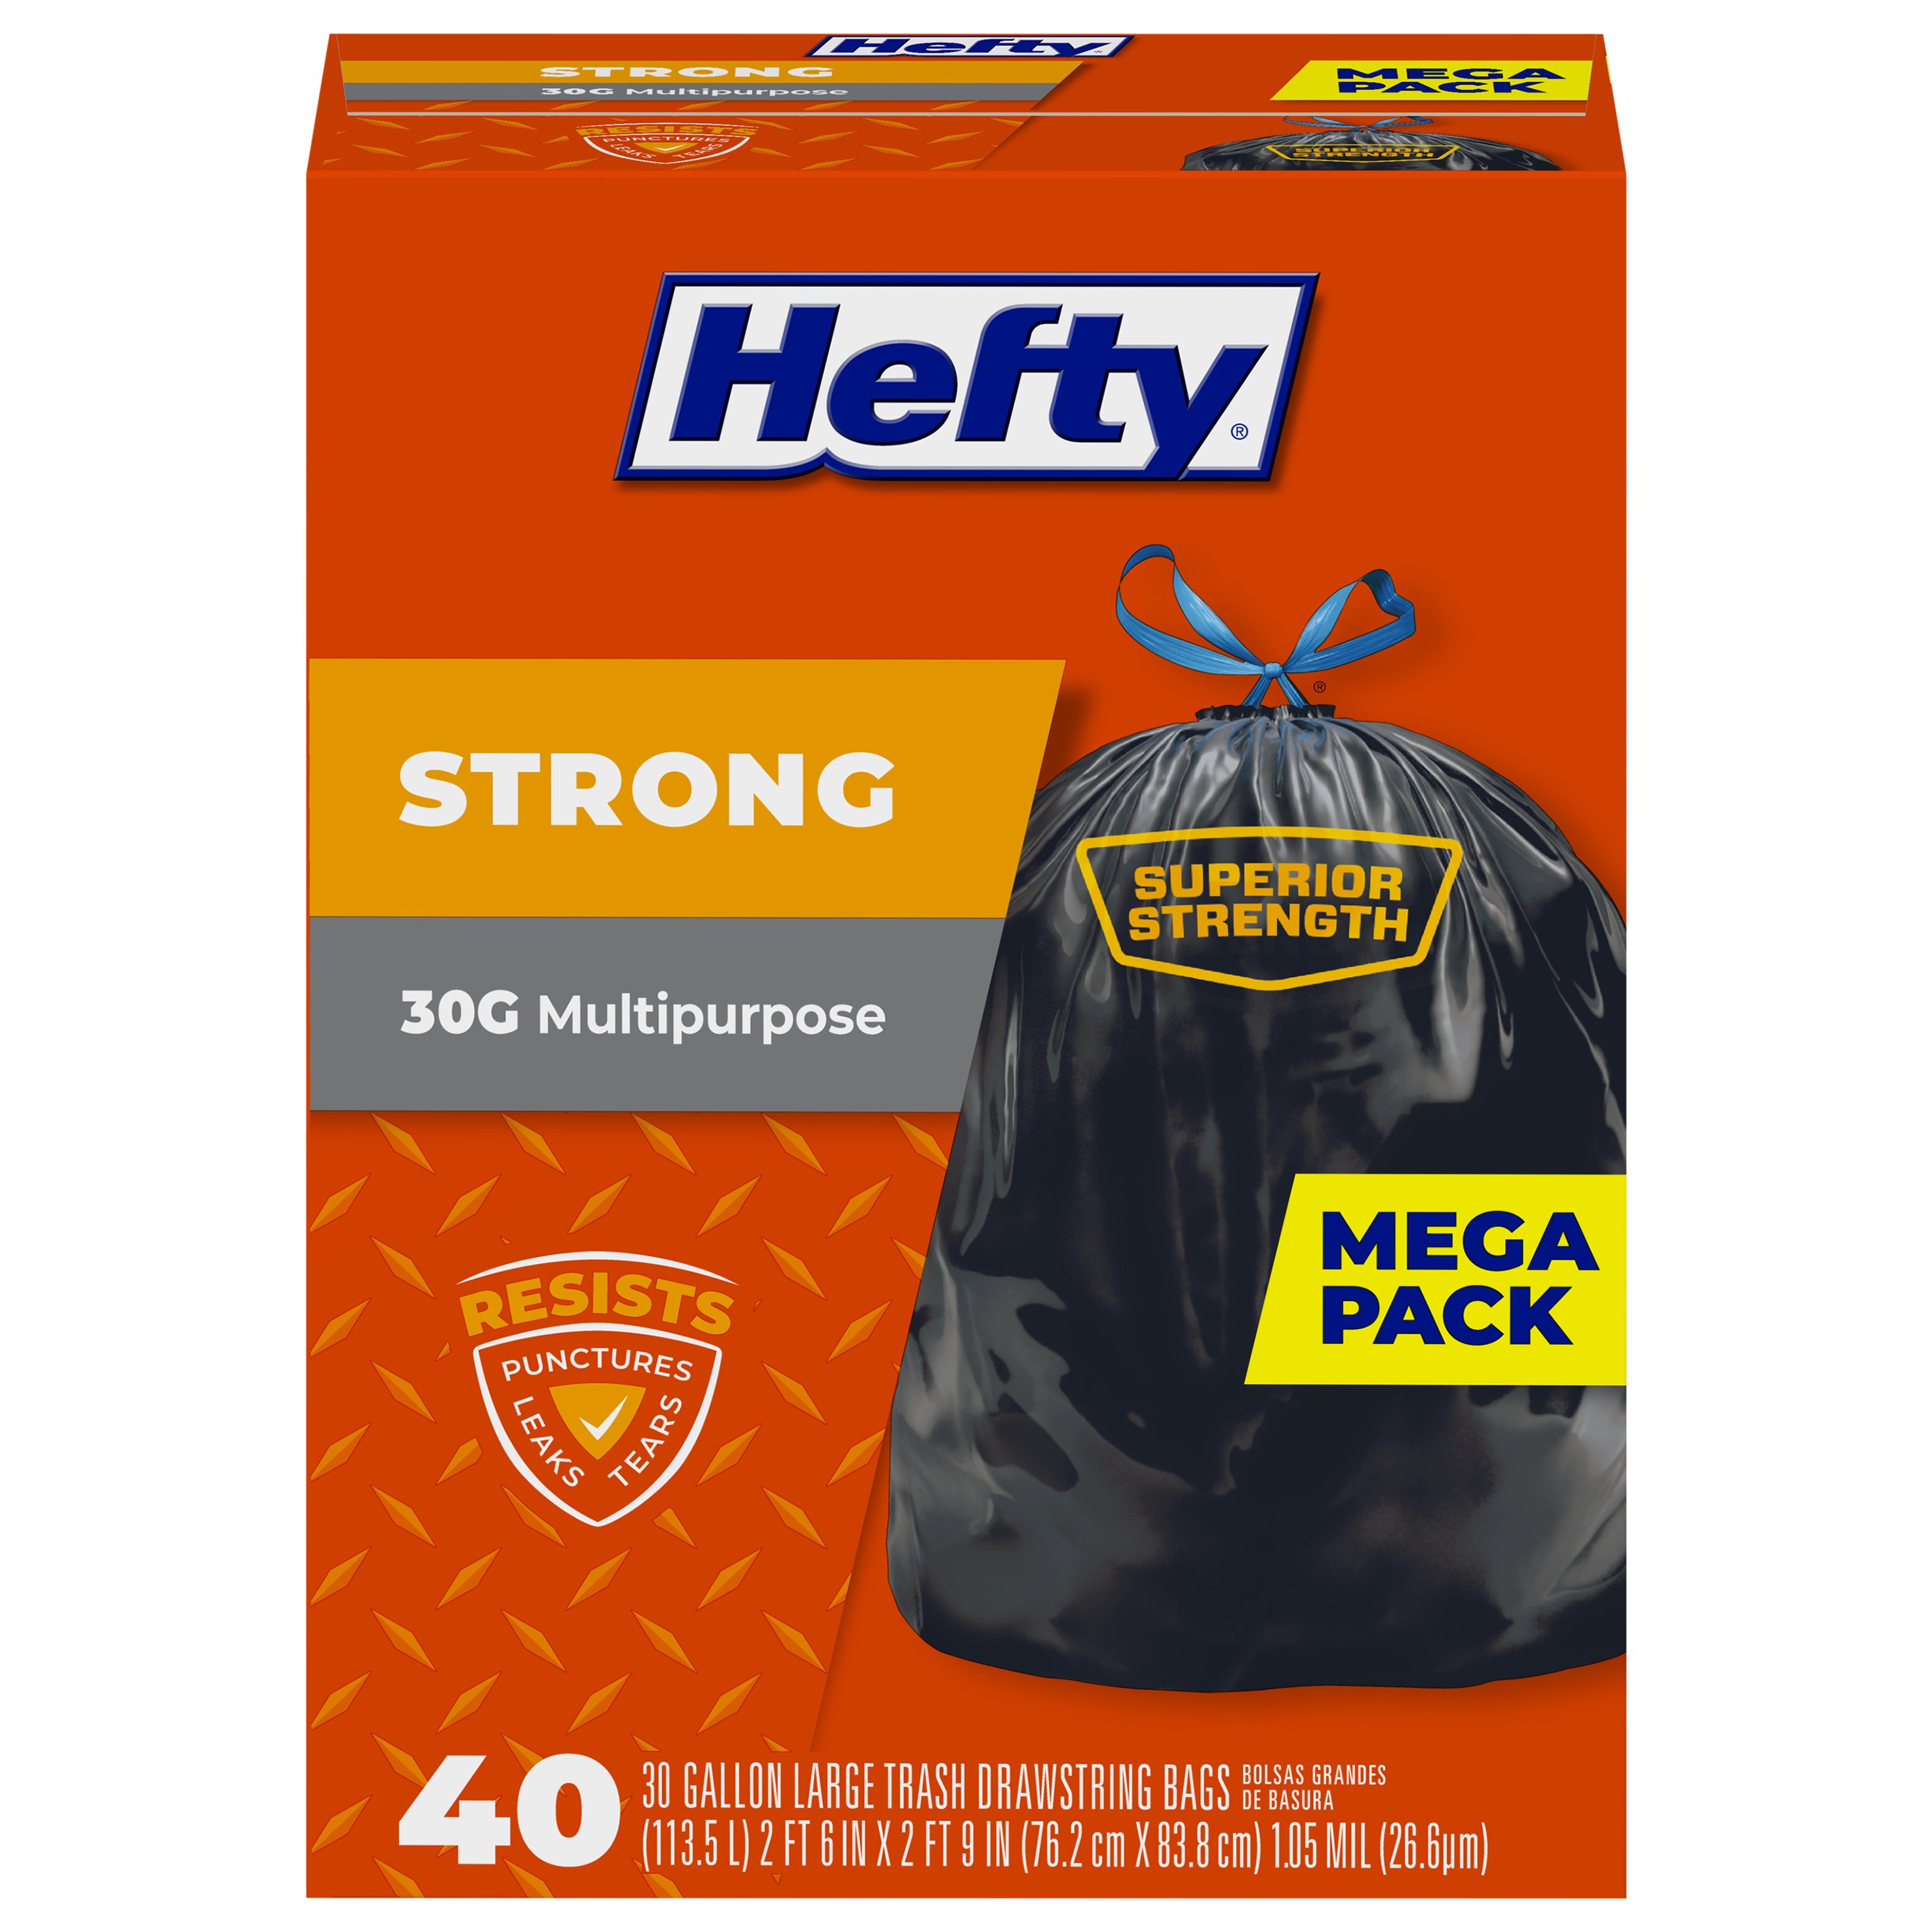 Hefty Strong 33-Gallon Trash Can Liner Extra Large Drawstring